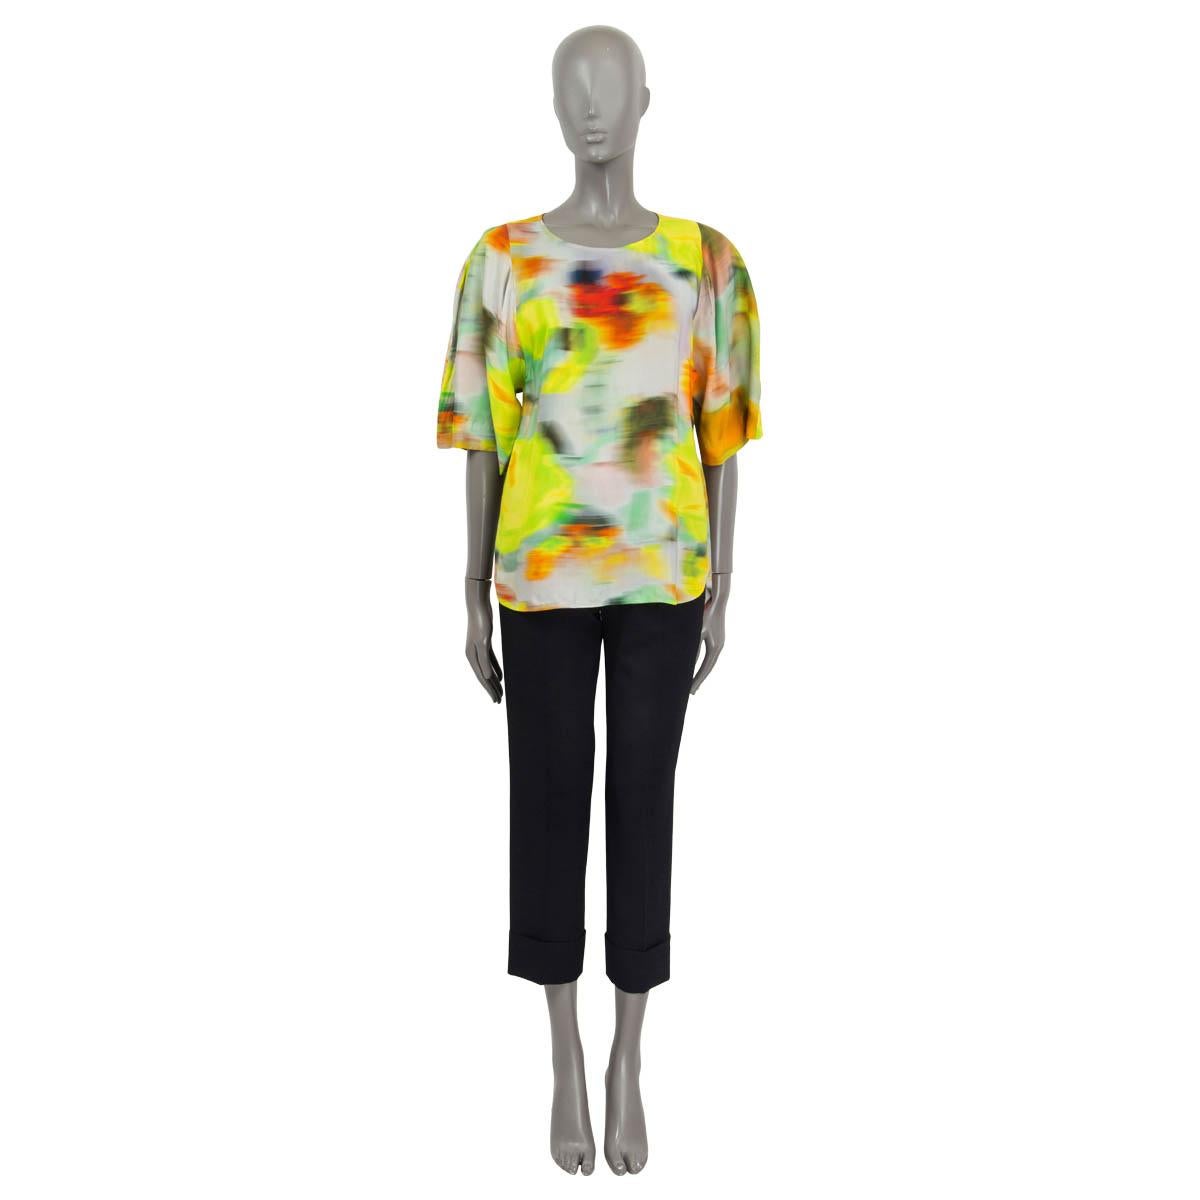 100% authentic Dries Van Noten blurry printed short sleeve blouse in neon yellow, green, gray, red, blue and orange viscose (100%). Opens with a button on the back. Unlined. Has been worn and is in excellent condition.

2022